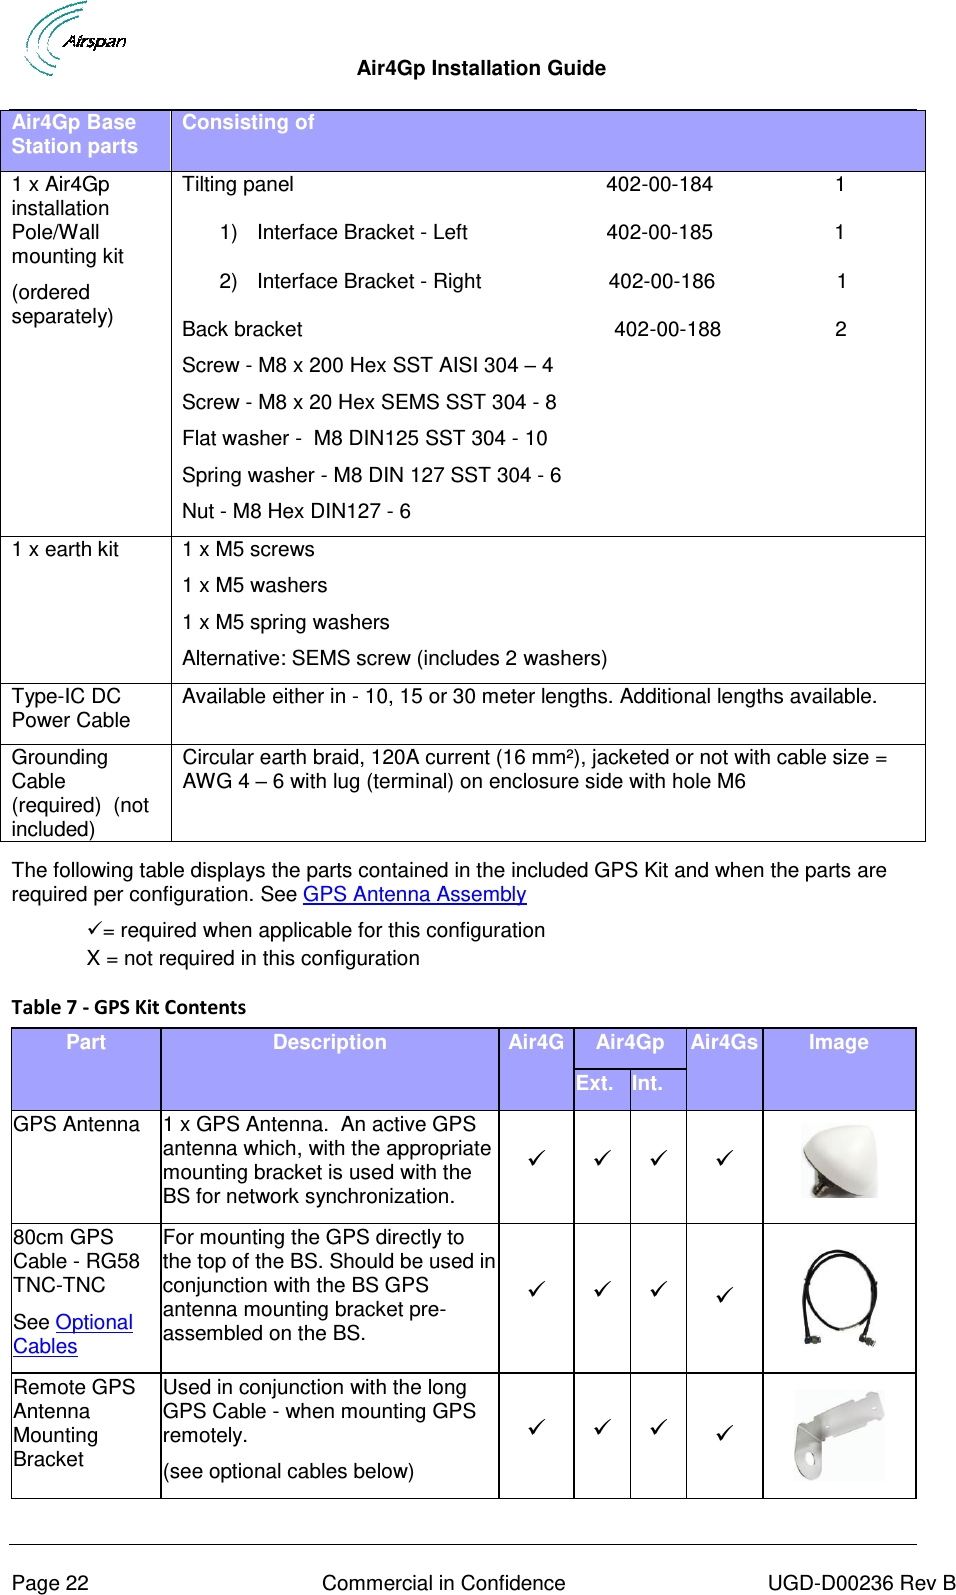  Air4Gp Installation Guide     Page 22  Commercial in Confidence  UGD-D00236 Rev B Air4Gp Base Station parts Consisting of 1 x Air4Gp installation Pole/Wall mounting kit (ordered separately) Tilting panel                                                      402-00-184                     1      1)  Interface Bracket - Left                        402-00-185                     1 2)  Interface Bracket - Right                      402-00-186                     1 Back bracket                                                      402-00-188              2 Screw - M8 x 200 Hex SST AISI 304 – 4 Screw - M8 x 20 Hex SEMS SST 304 - 8 Flat washer -  M8 DIN125 SST 304 - 10 Spring washer - M8 DIN 127 SST 304 - 6 Nut - M8 Hex DIN127 - 6 1 x earth kit 1 x M5 screws 1 x M5 washers 1 x M5 spring washers Alternative: SEMS screw (includes 2 washers) Type-IC DC Power Cable Available either in - 10, 15 or 30 meter lengths. Additional lengths available. Grounding Cable (required)  (not included)  Circular earth braid, 120A current (16 mm²), jacketed or not with cable size = AWG 4 – 6 with lug (terminal) on enclosure side with hole M6  The following table displays the parts contained in the included GPS Kit and when the parts are required per configuration. See GPS Antenna Assembly = required when applicable for this configuration X = not required in this configuration Table 7 - GPS Kit Contents Part Description Air4G Air4Gp Air4Gs Image Ext. Int. GPS Antenna 1 x GPS Antenna.  An active GPS antenna which, with the appropriate mounting bracket is used with the BS for network synchronization.      80cm GPS Cable - RG58 TNC-TNC See Optional Cables For mounting the GPS directly to the top of the BS. Should be used in conjunction with the BS GPS antenna mounting bracket pre-assembled on the BS.      Remote GPS Antenna Mounting Bracket Used in conjunction with the long GPS Cable - when mounting GPS remotely. (see optional cables below)      